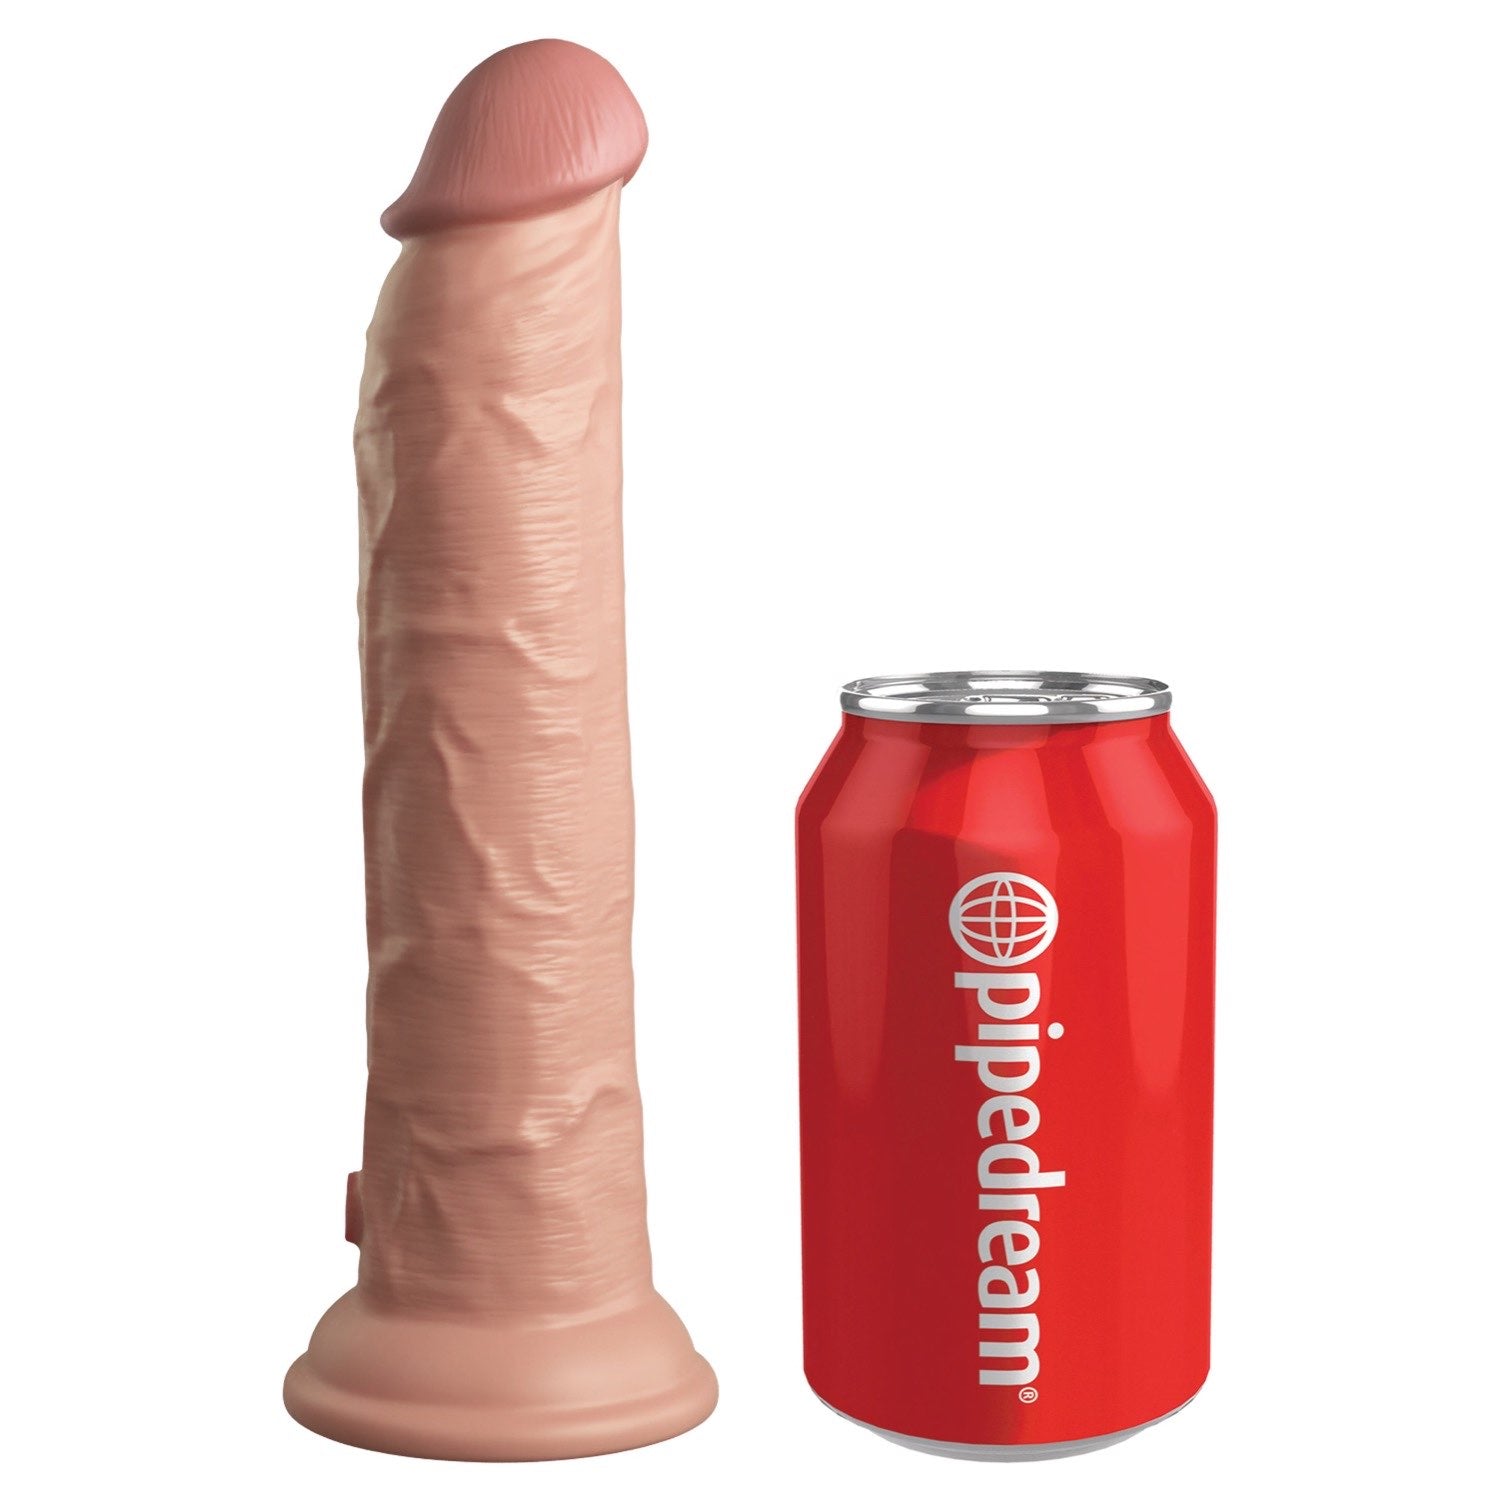 King Cock Elite 9&quot; Vibrating Dual Density Cock with Remote - Flesh 22.9 cm USB Rechargeable Vibrating Dong by Pipedream